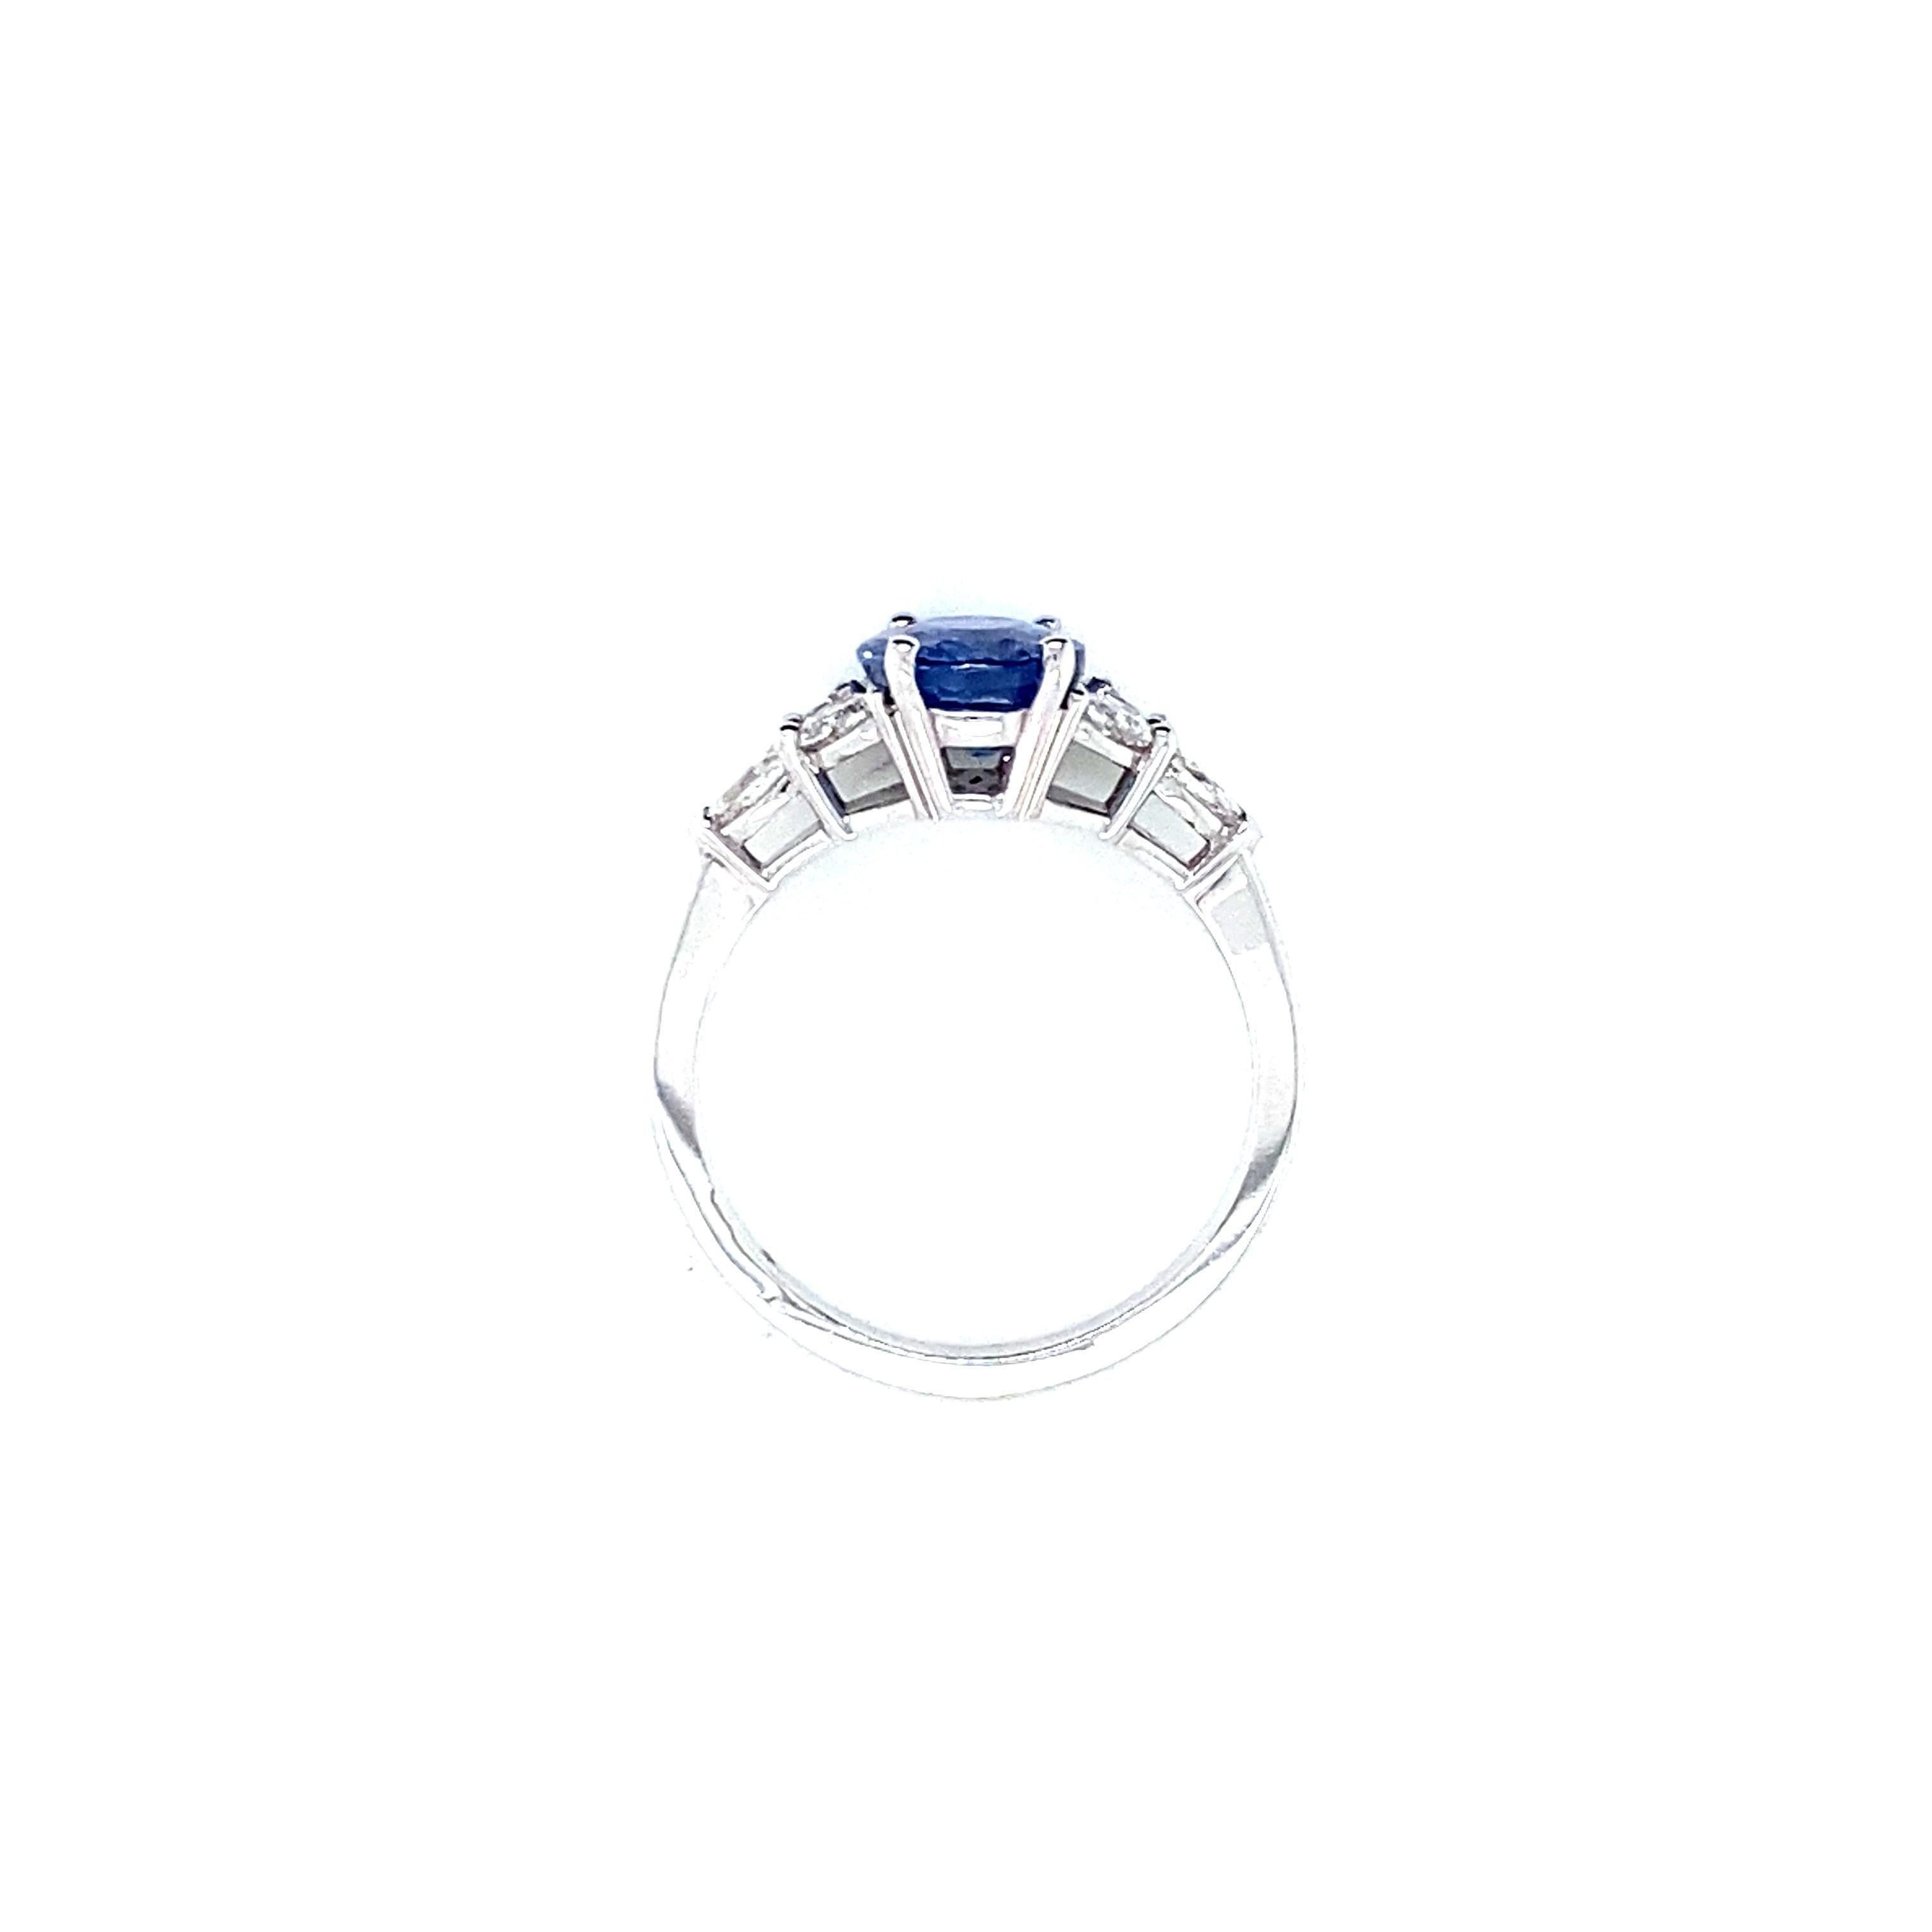 Women's White Gold Ring Acompagned a Oval Sapphire Ceylan Surrounded by Diamonds For Sale